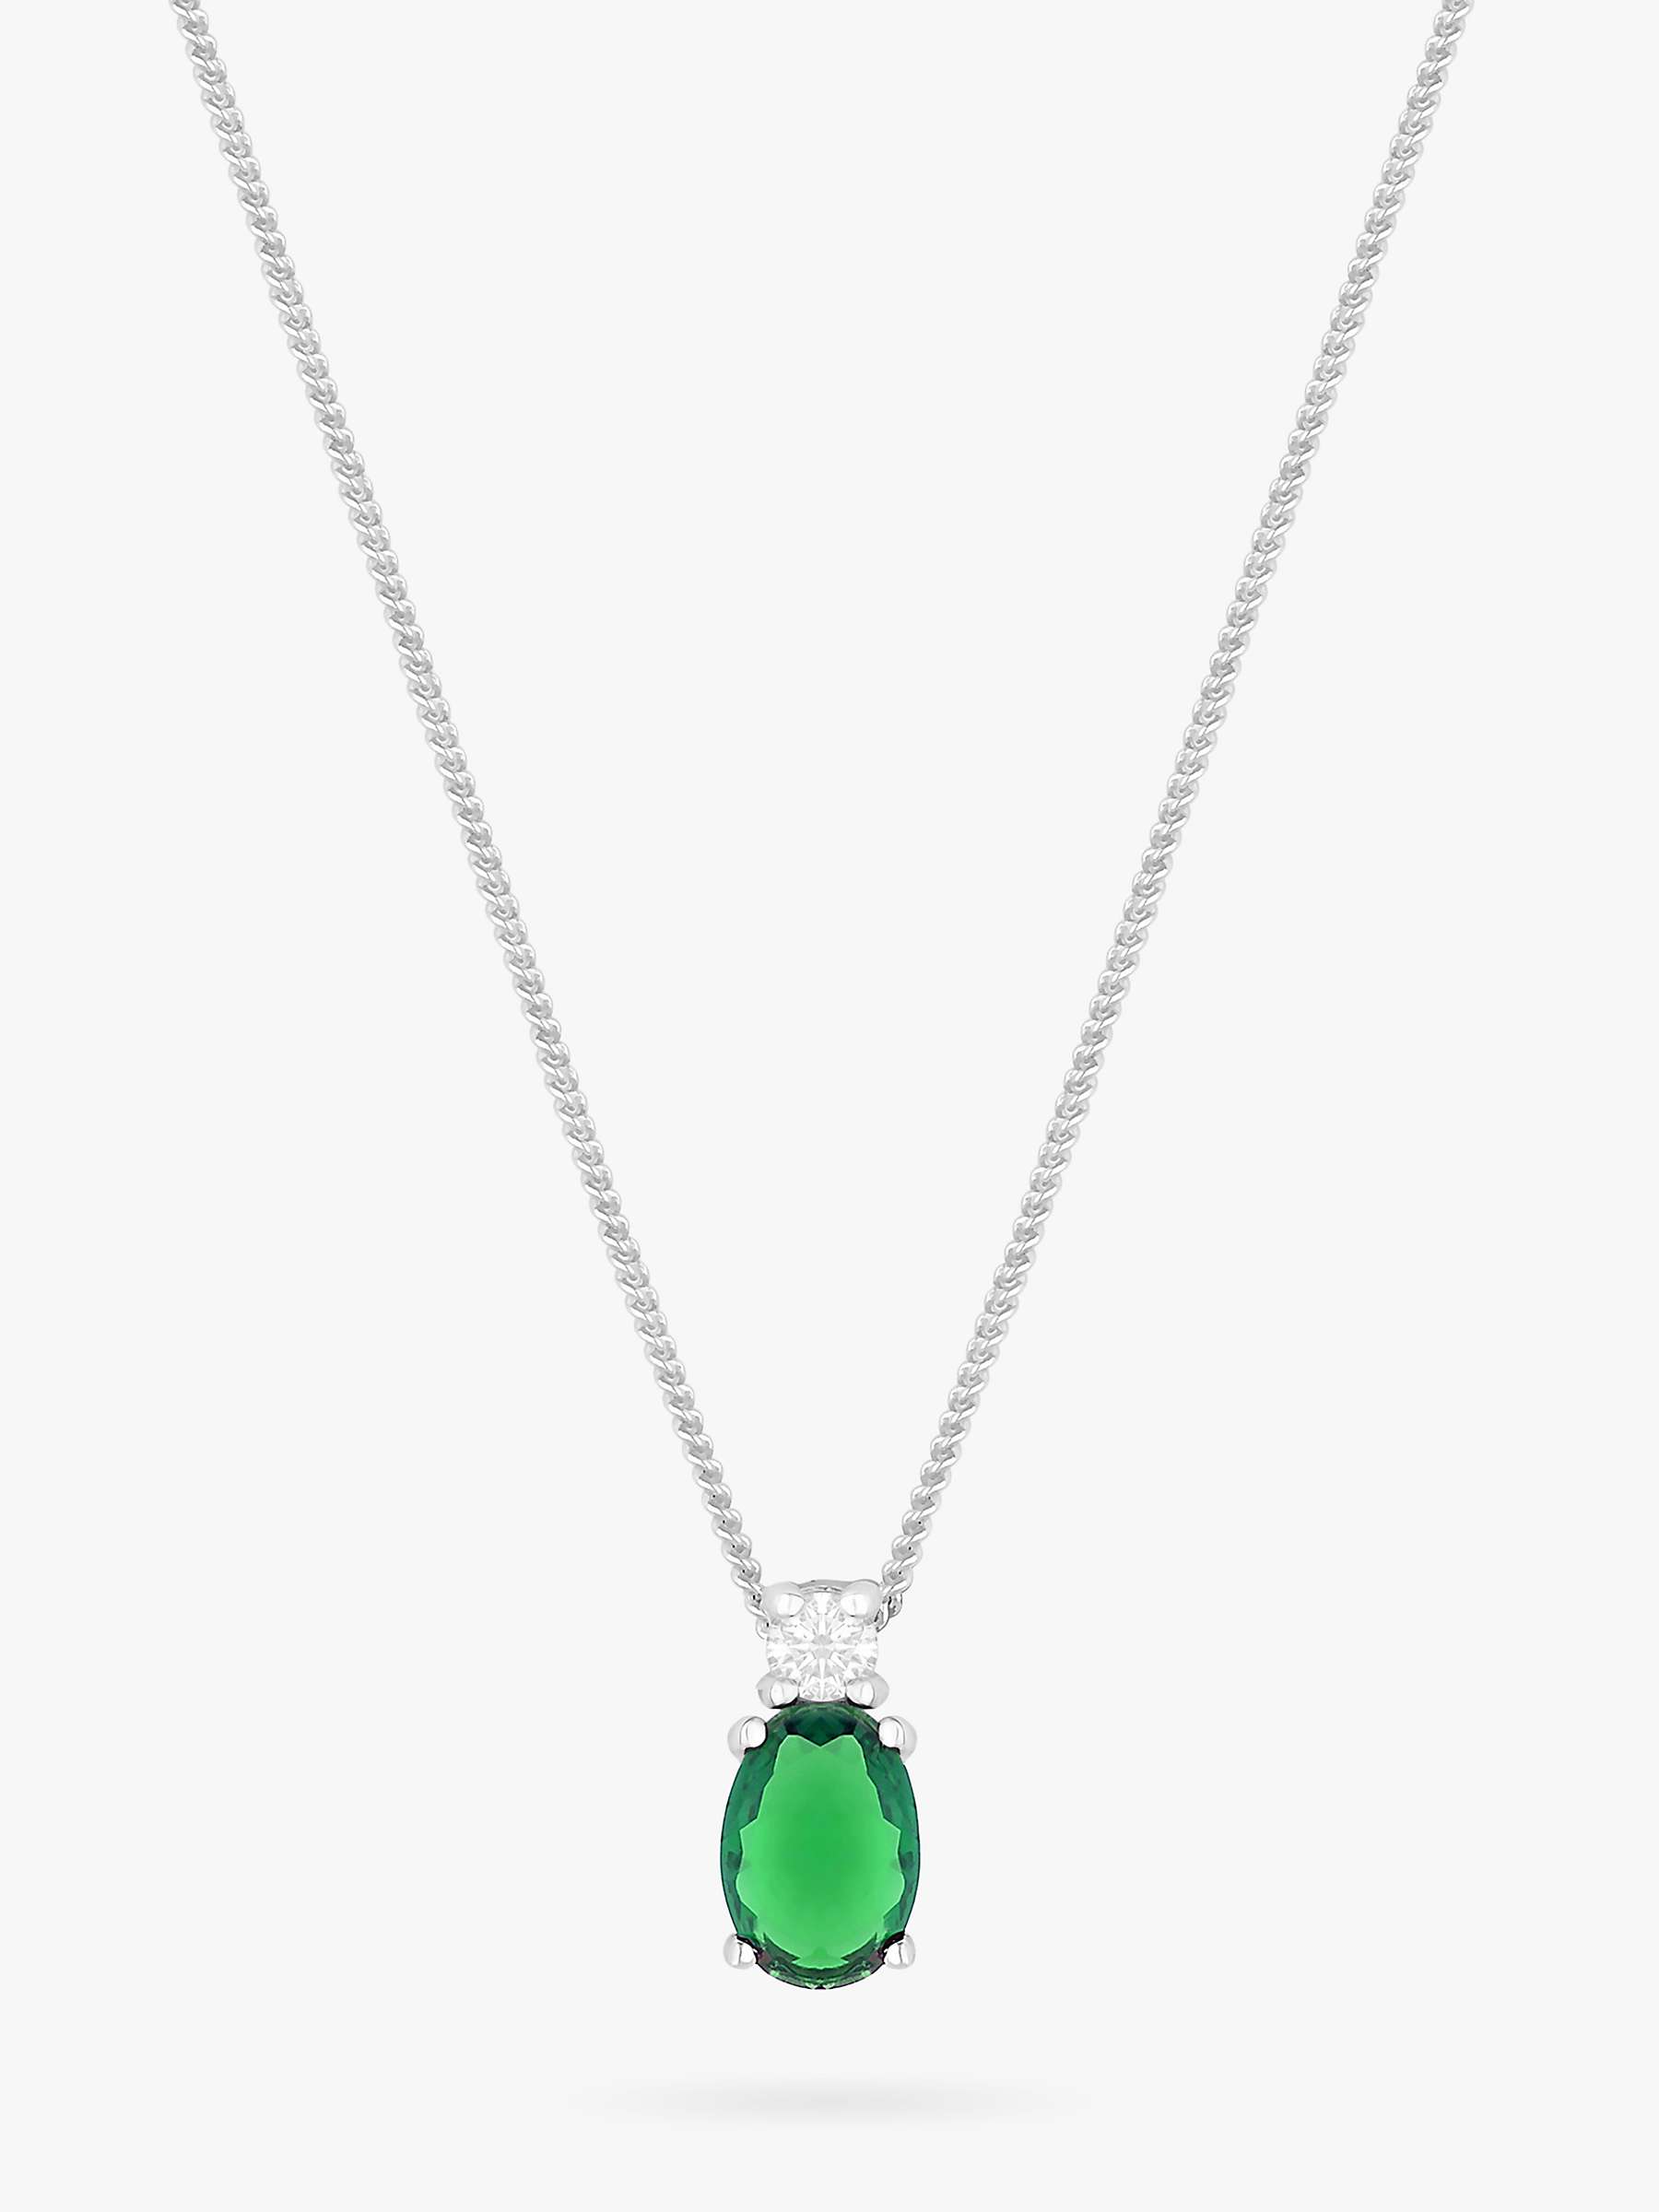 Buy Simply Silver Sterling Silver Emerald Pendant Necklace, Silver/Green Online at johnlewis.com